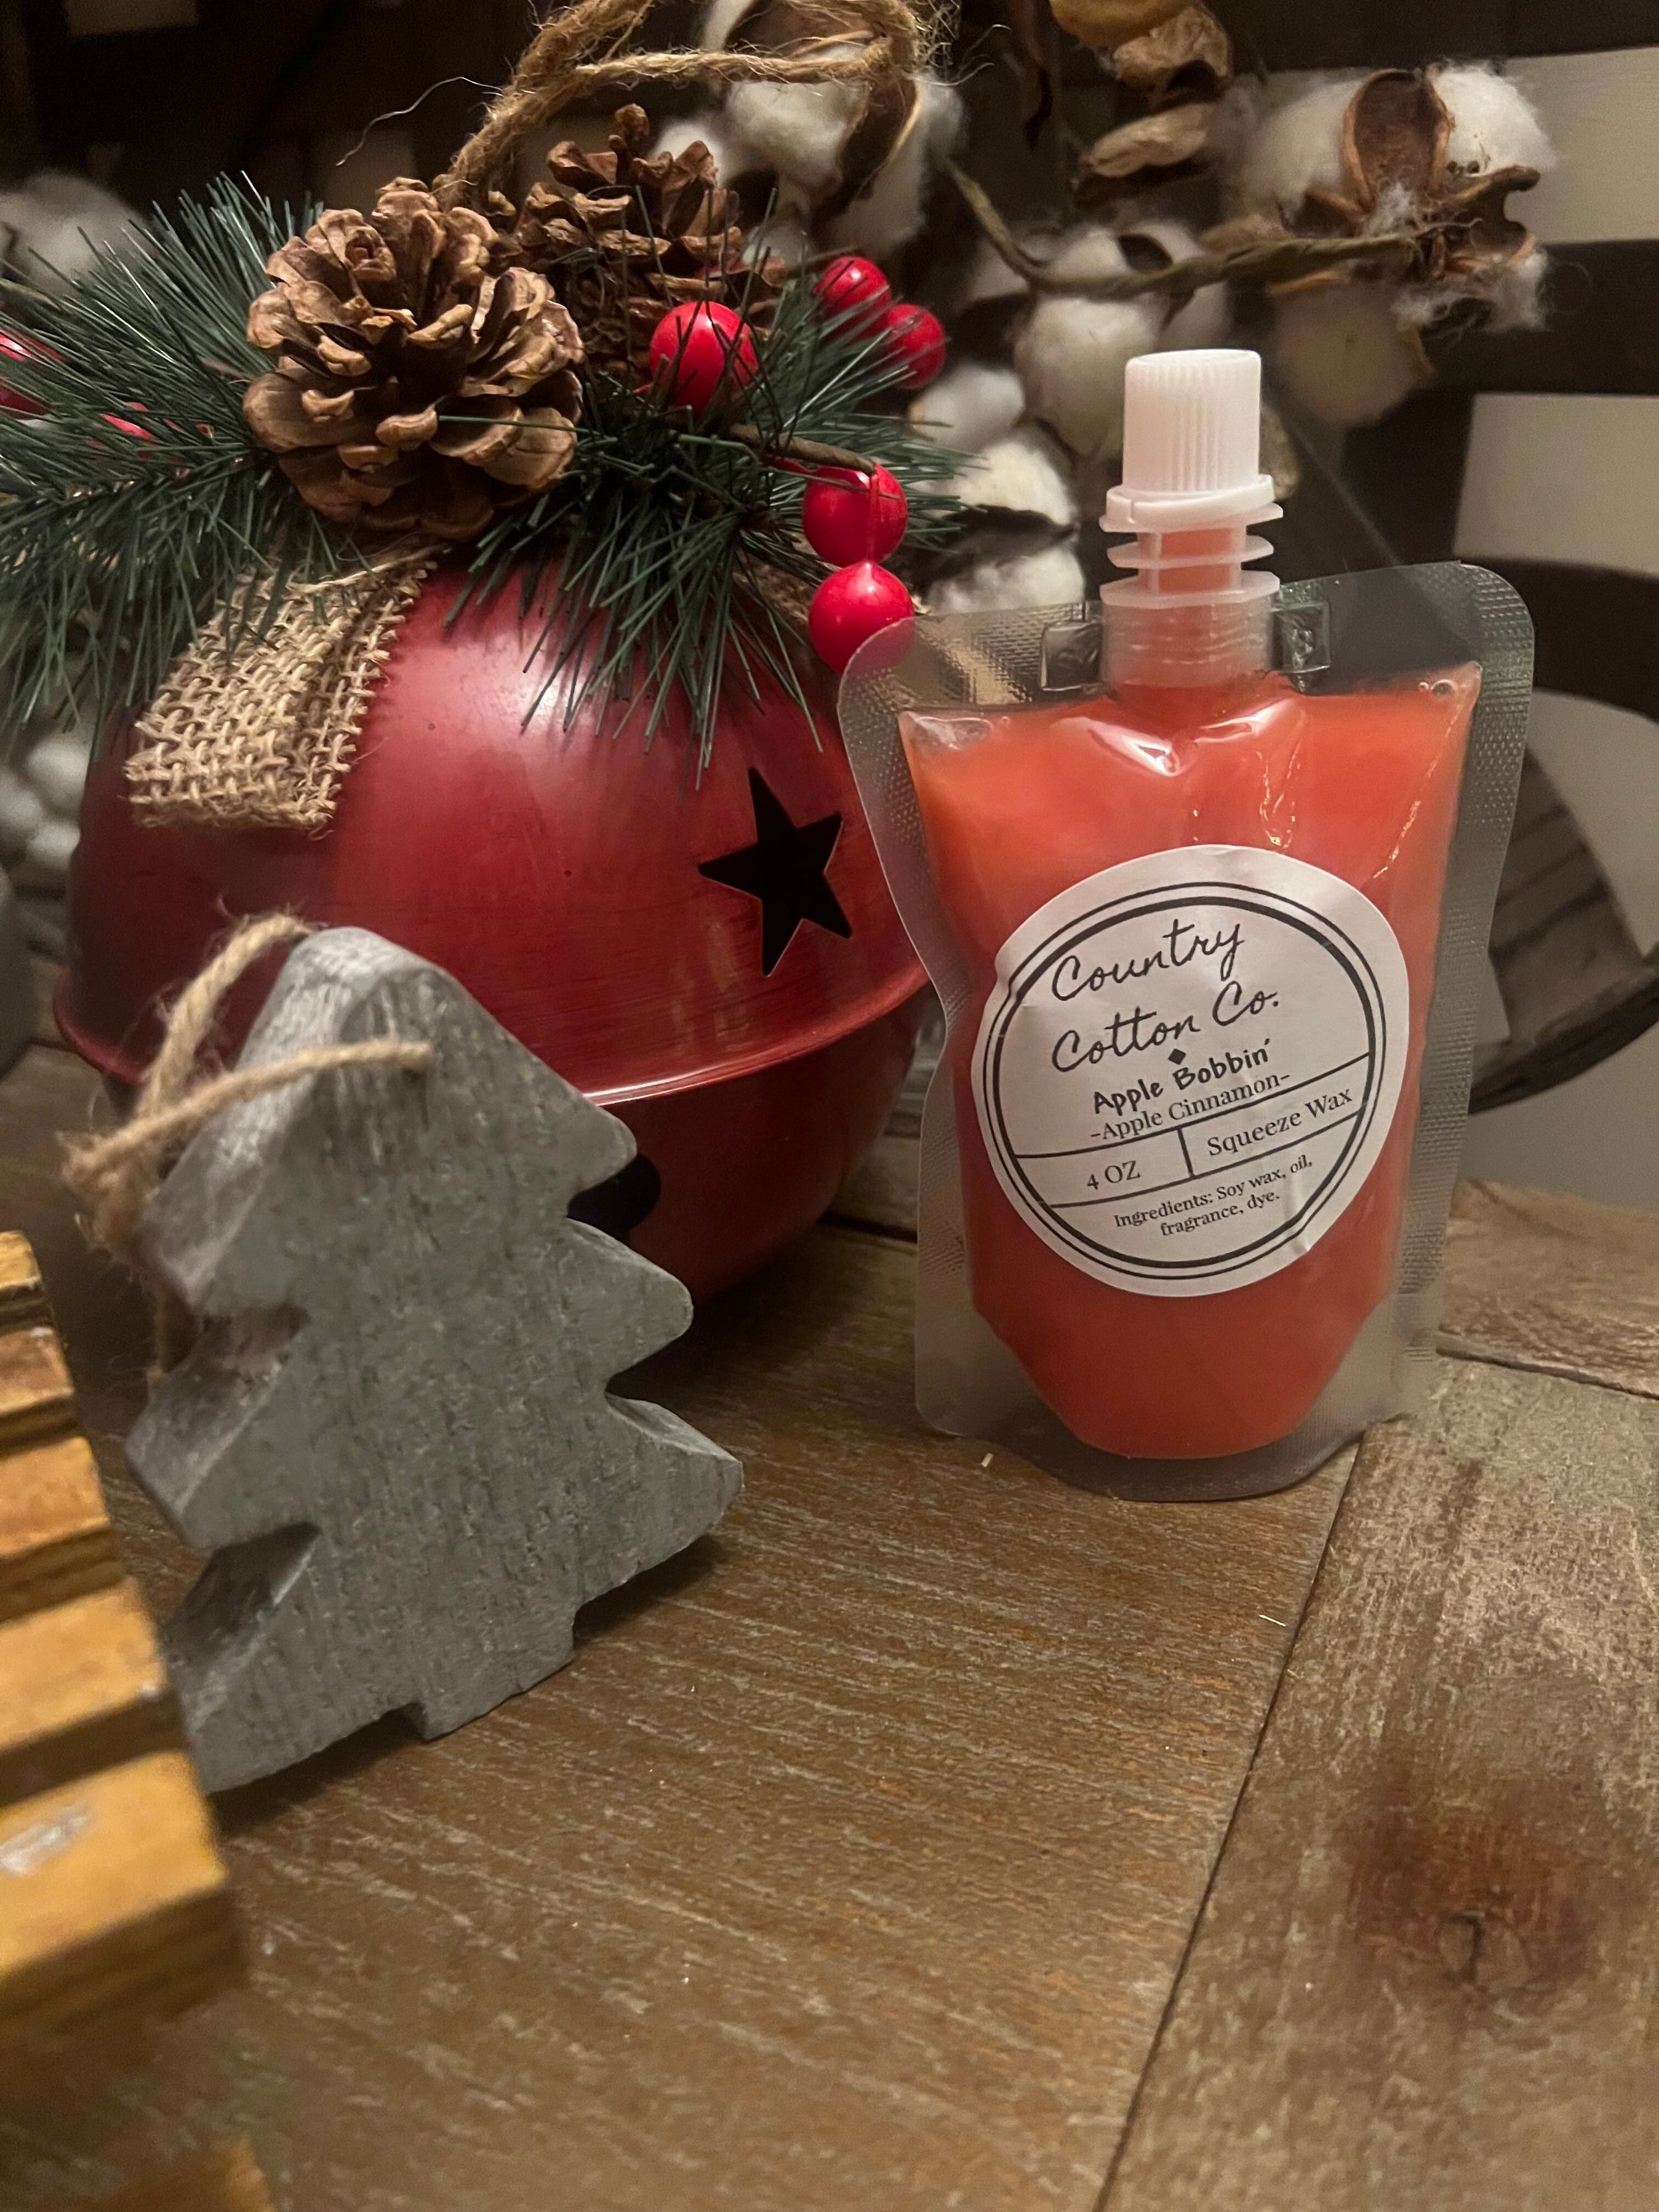 Christmas Wassail wax melts – Sweet Southern Scents Fragrance Co.